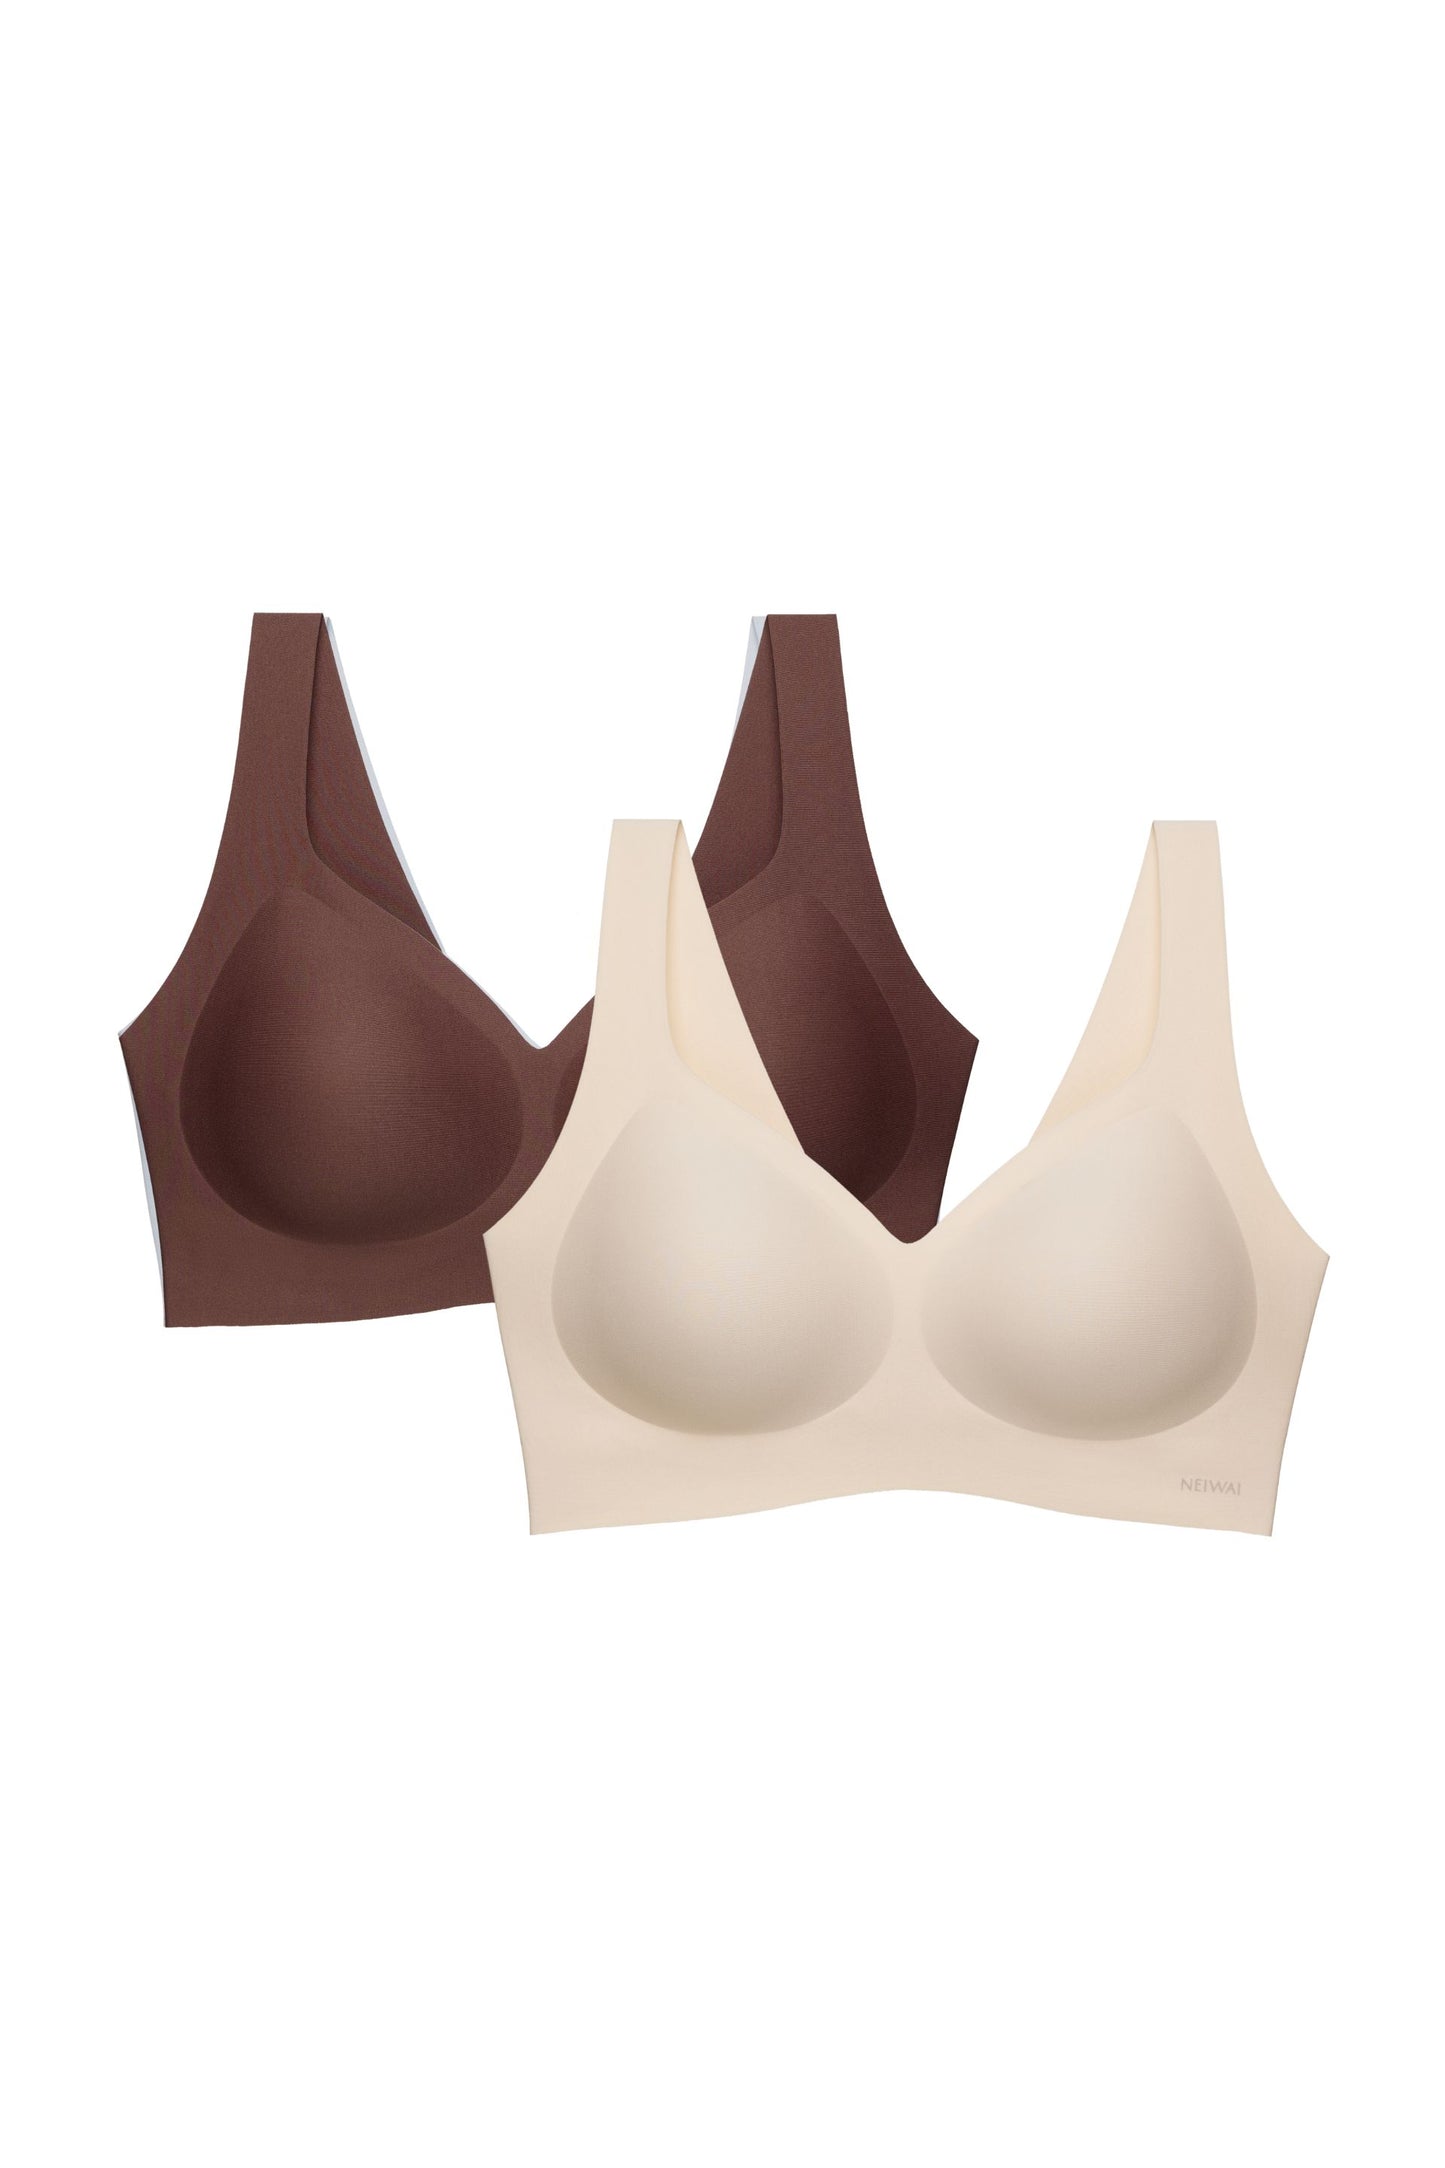 two bras in brown and beige